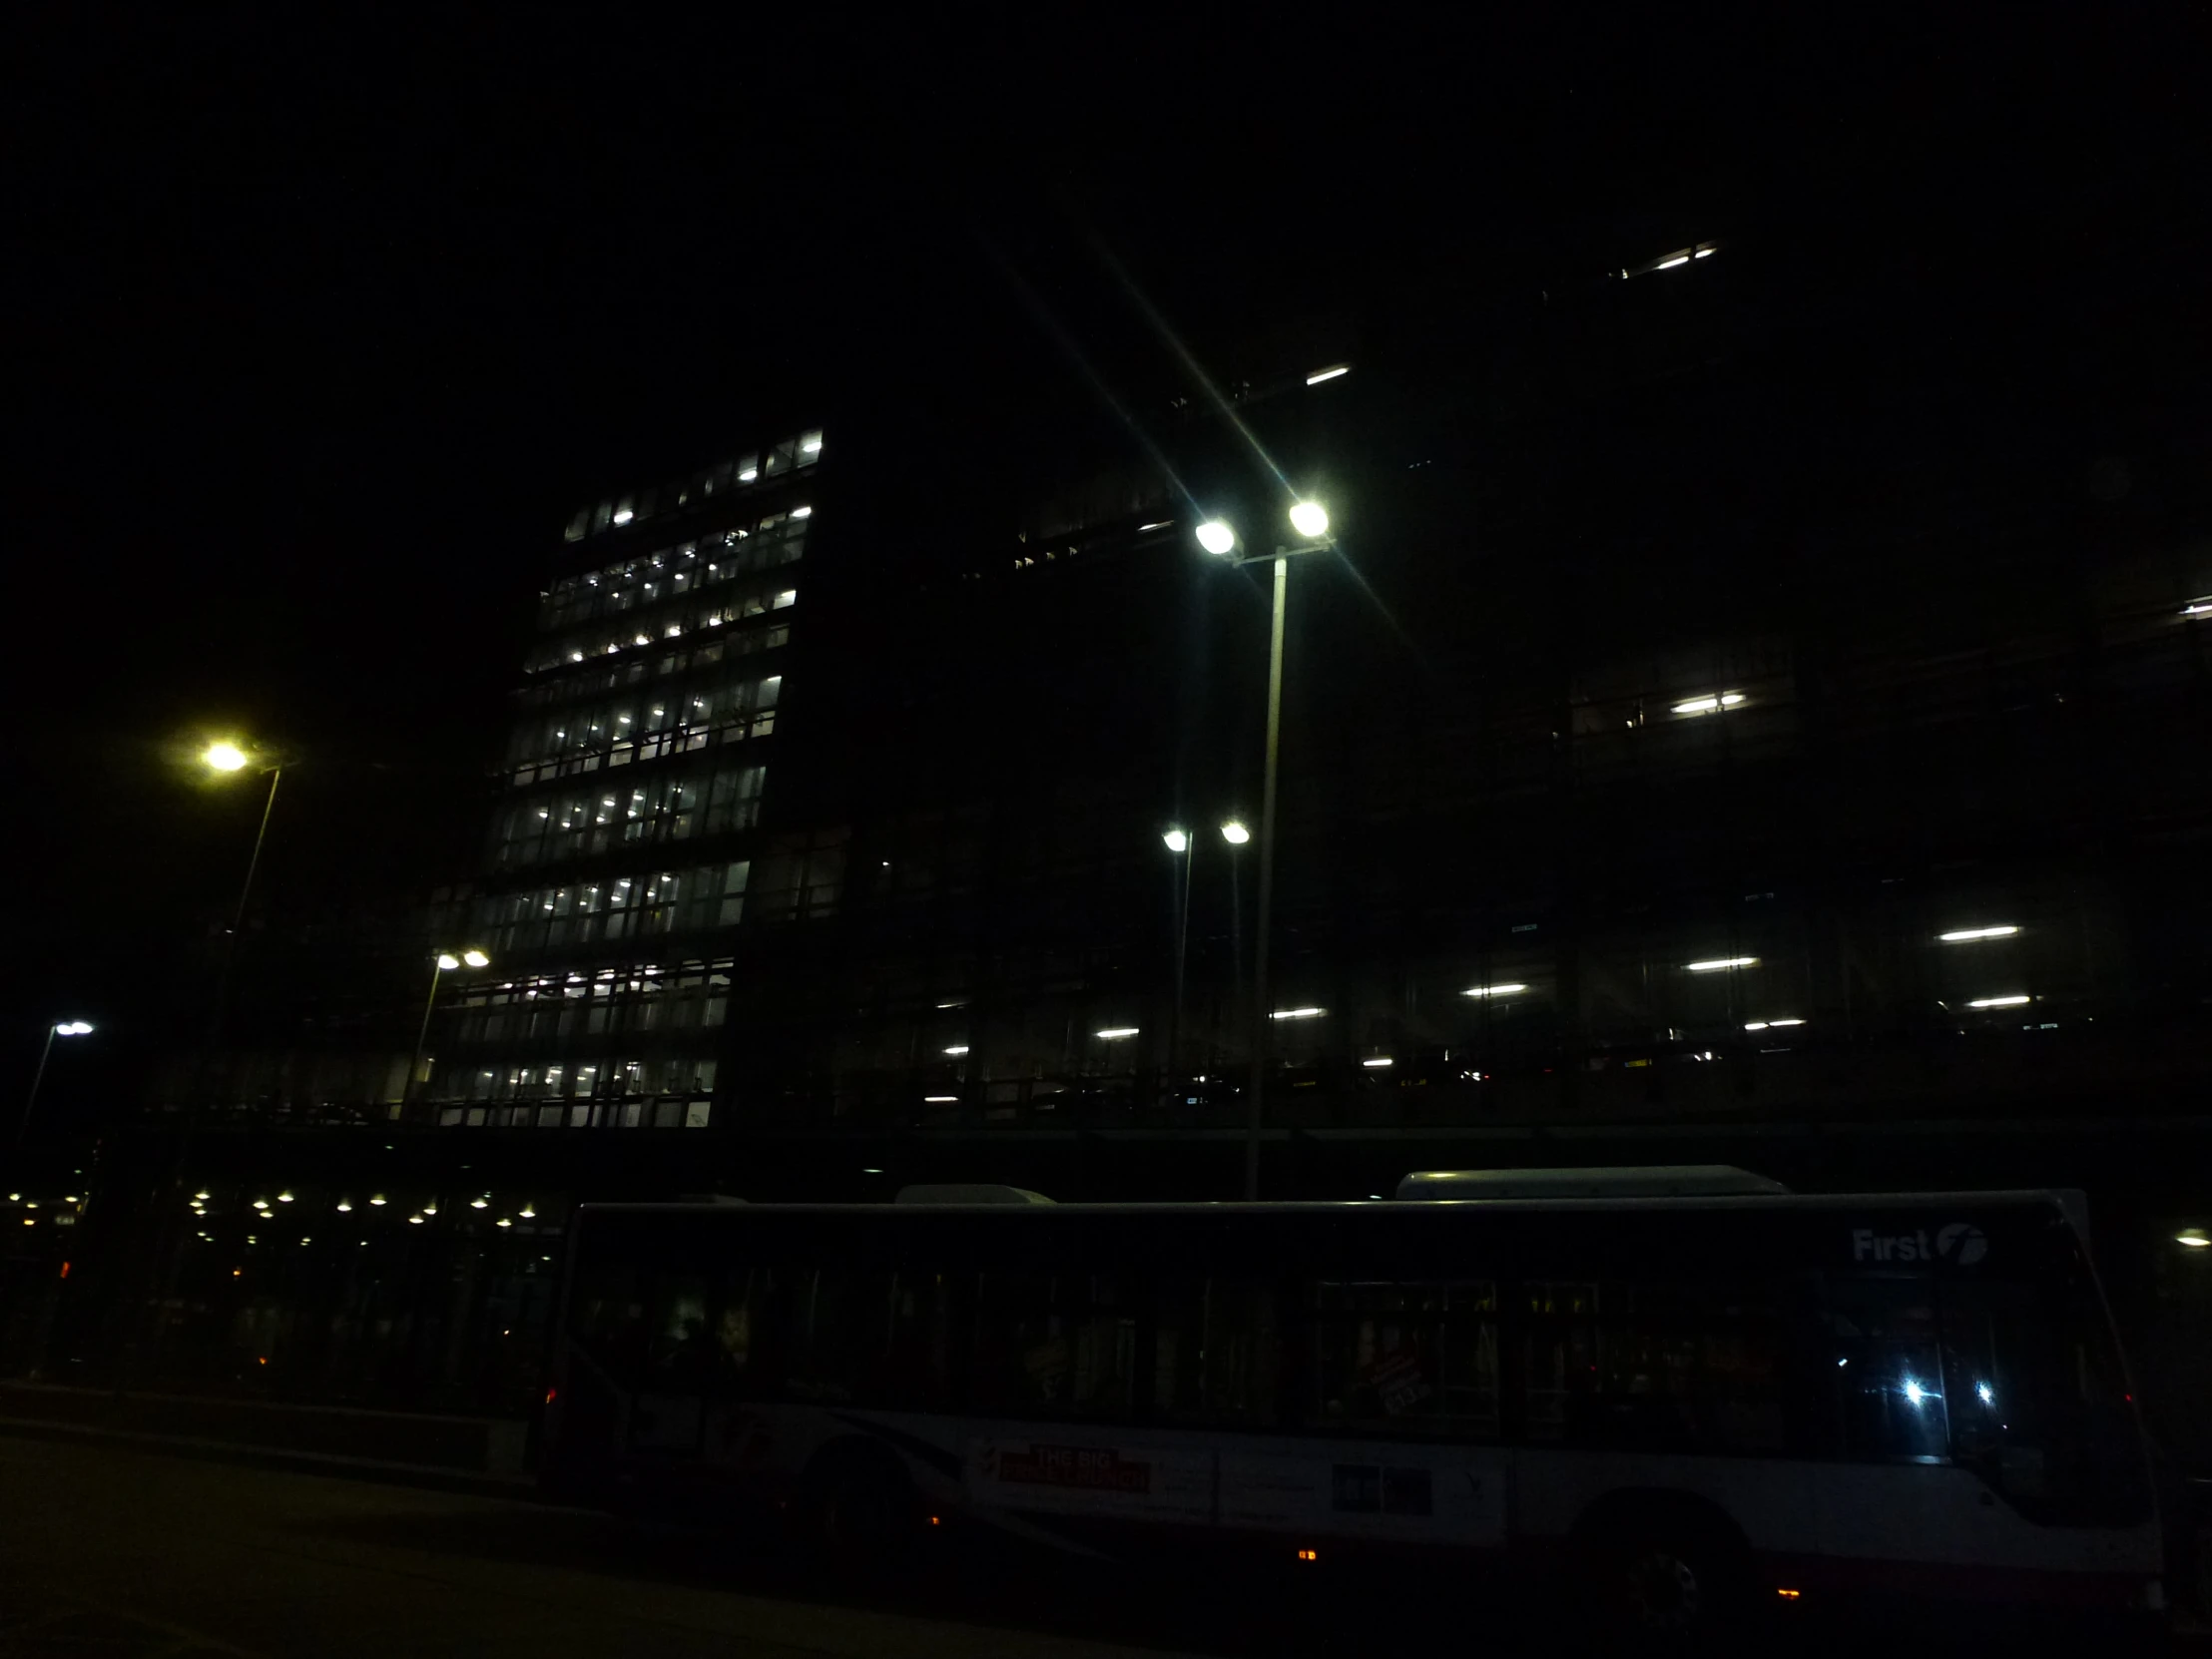 a city bus sits at night in front of a building